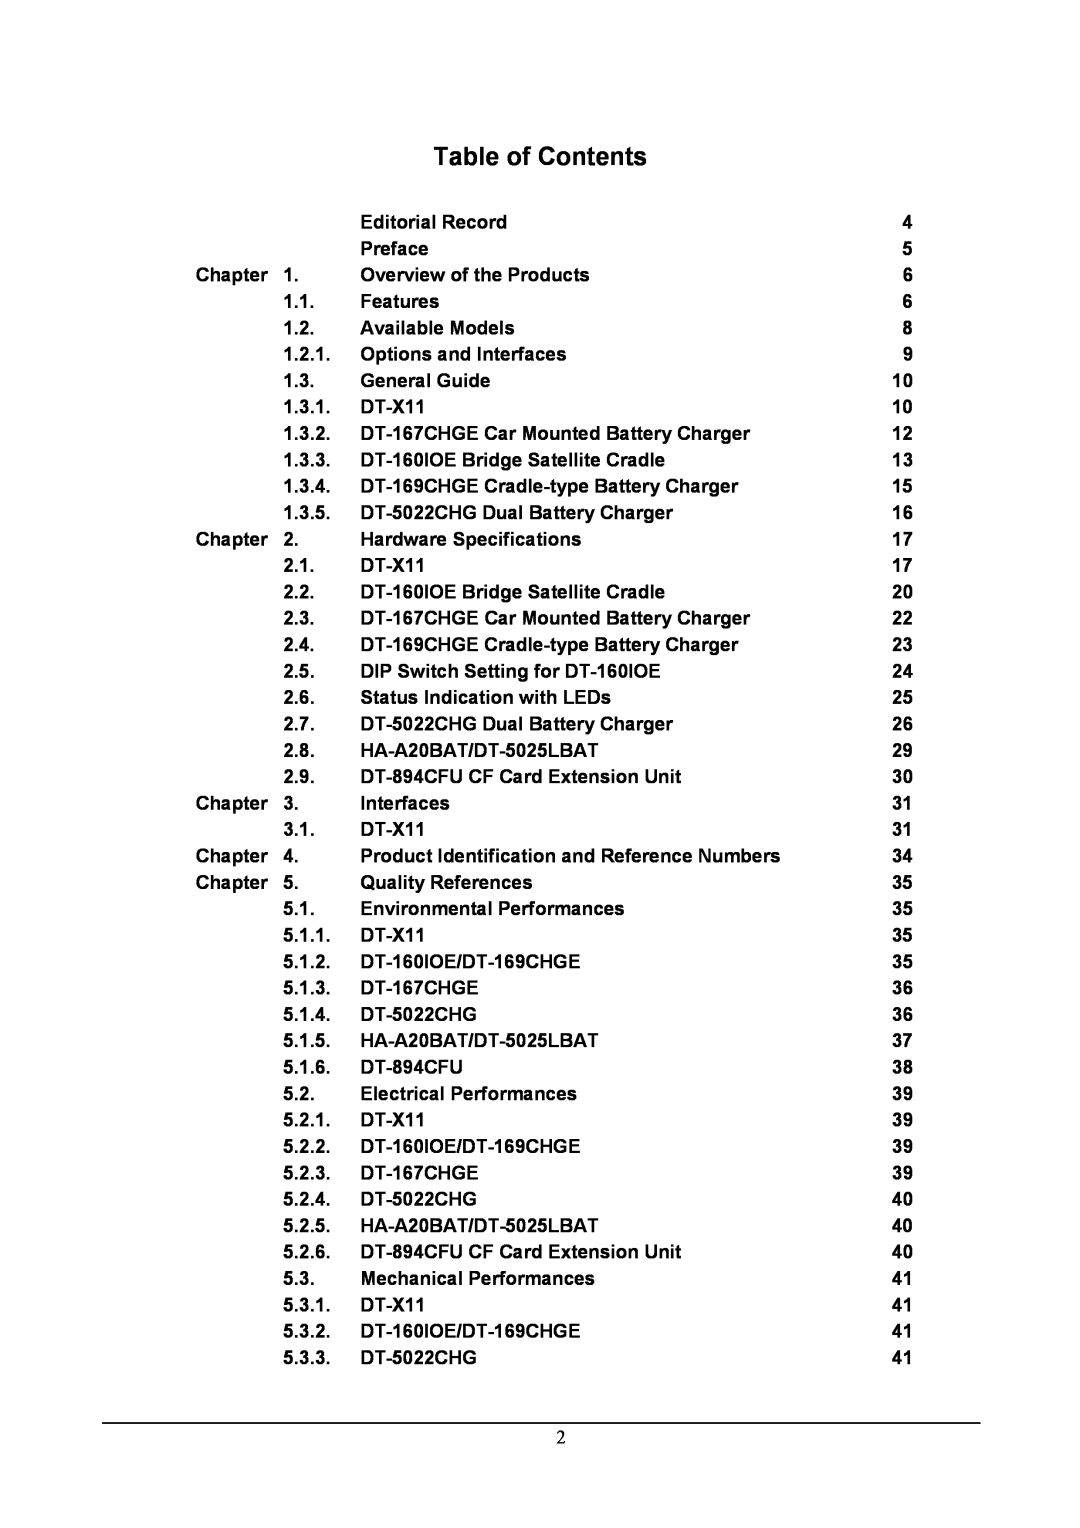 Casio handheld terminals Table of Contents, Editorial Record, Preface, Chapter, Overview of the Products, Features, DT-X11 